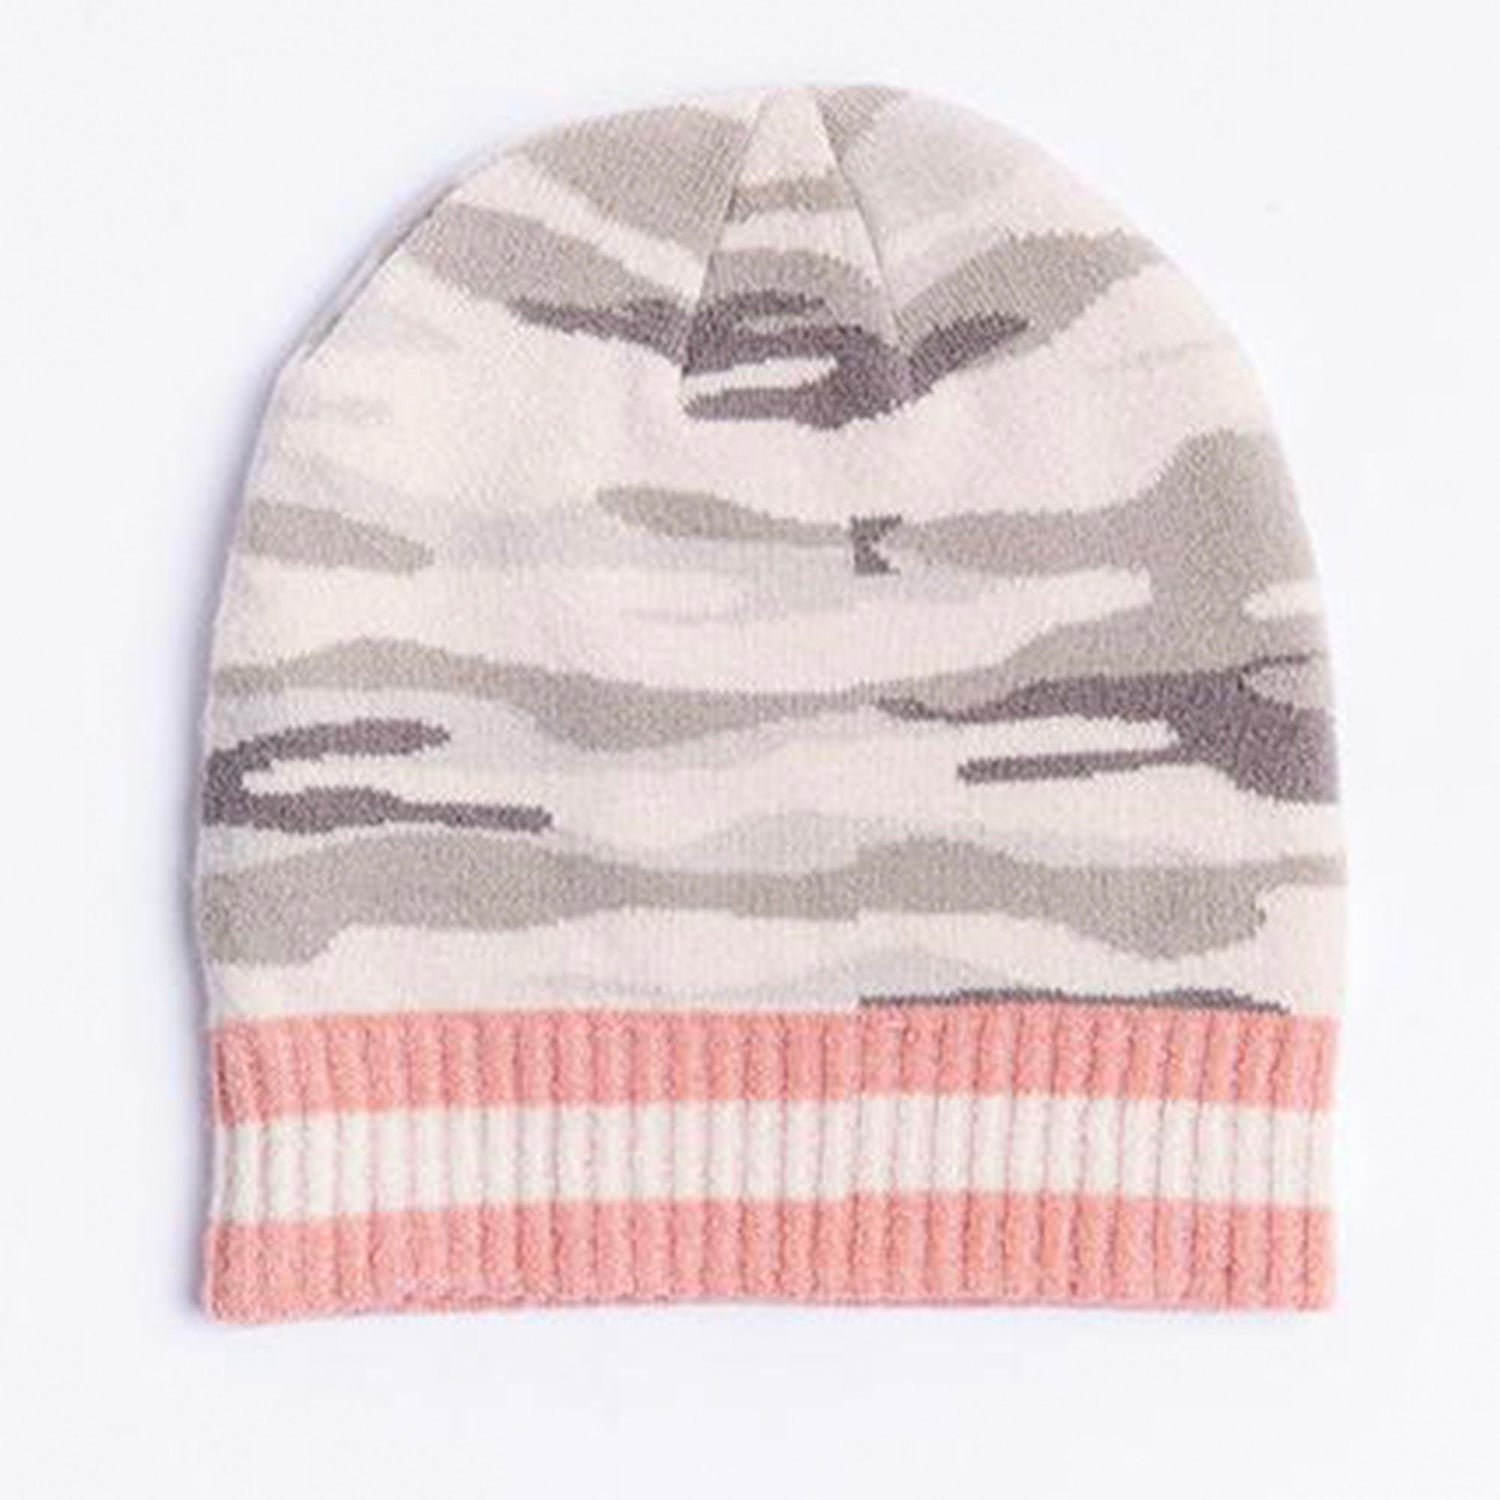 P.J. Salvage Cozy Beanie. Easy accessory style in this knit beanie with different pattern choices. A perfect mid-weight hat for changing seasons.